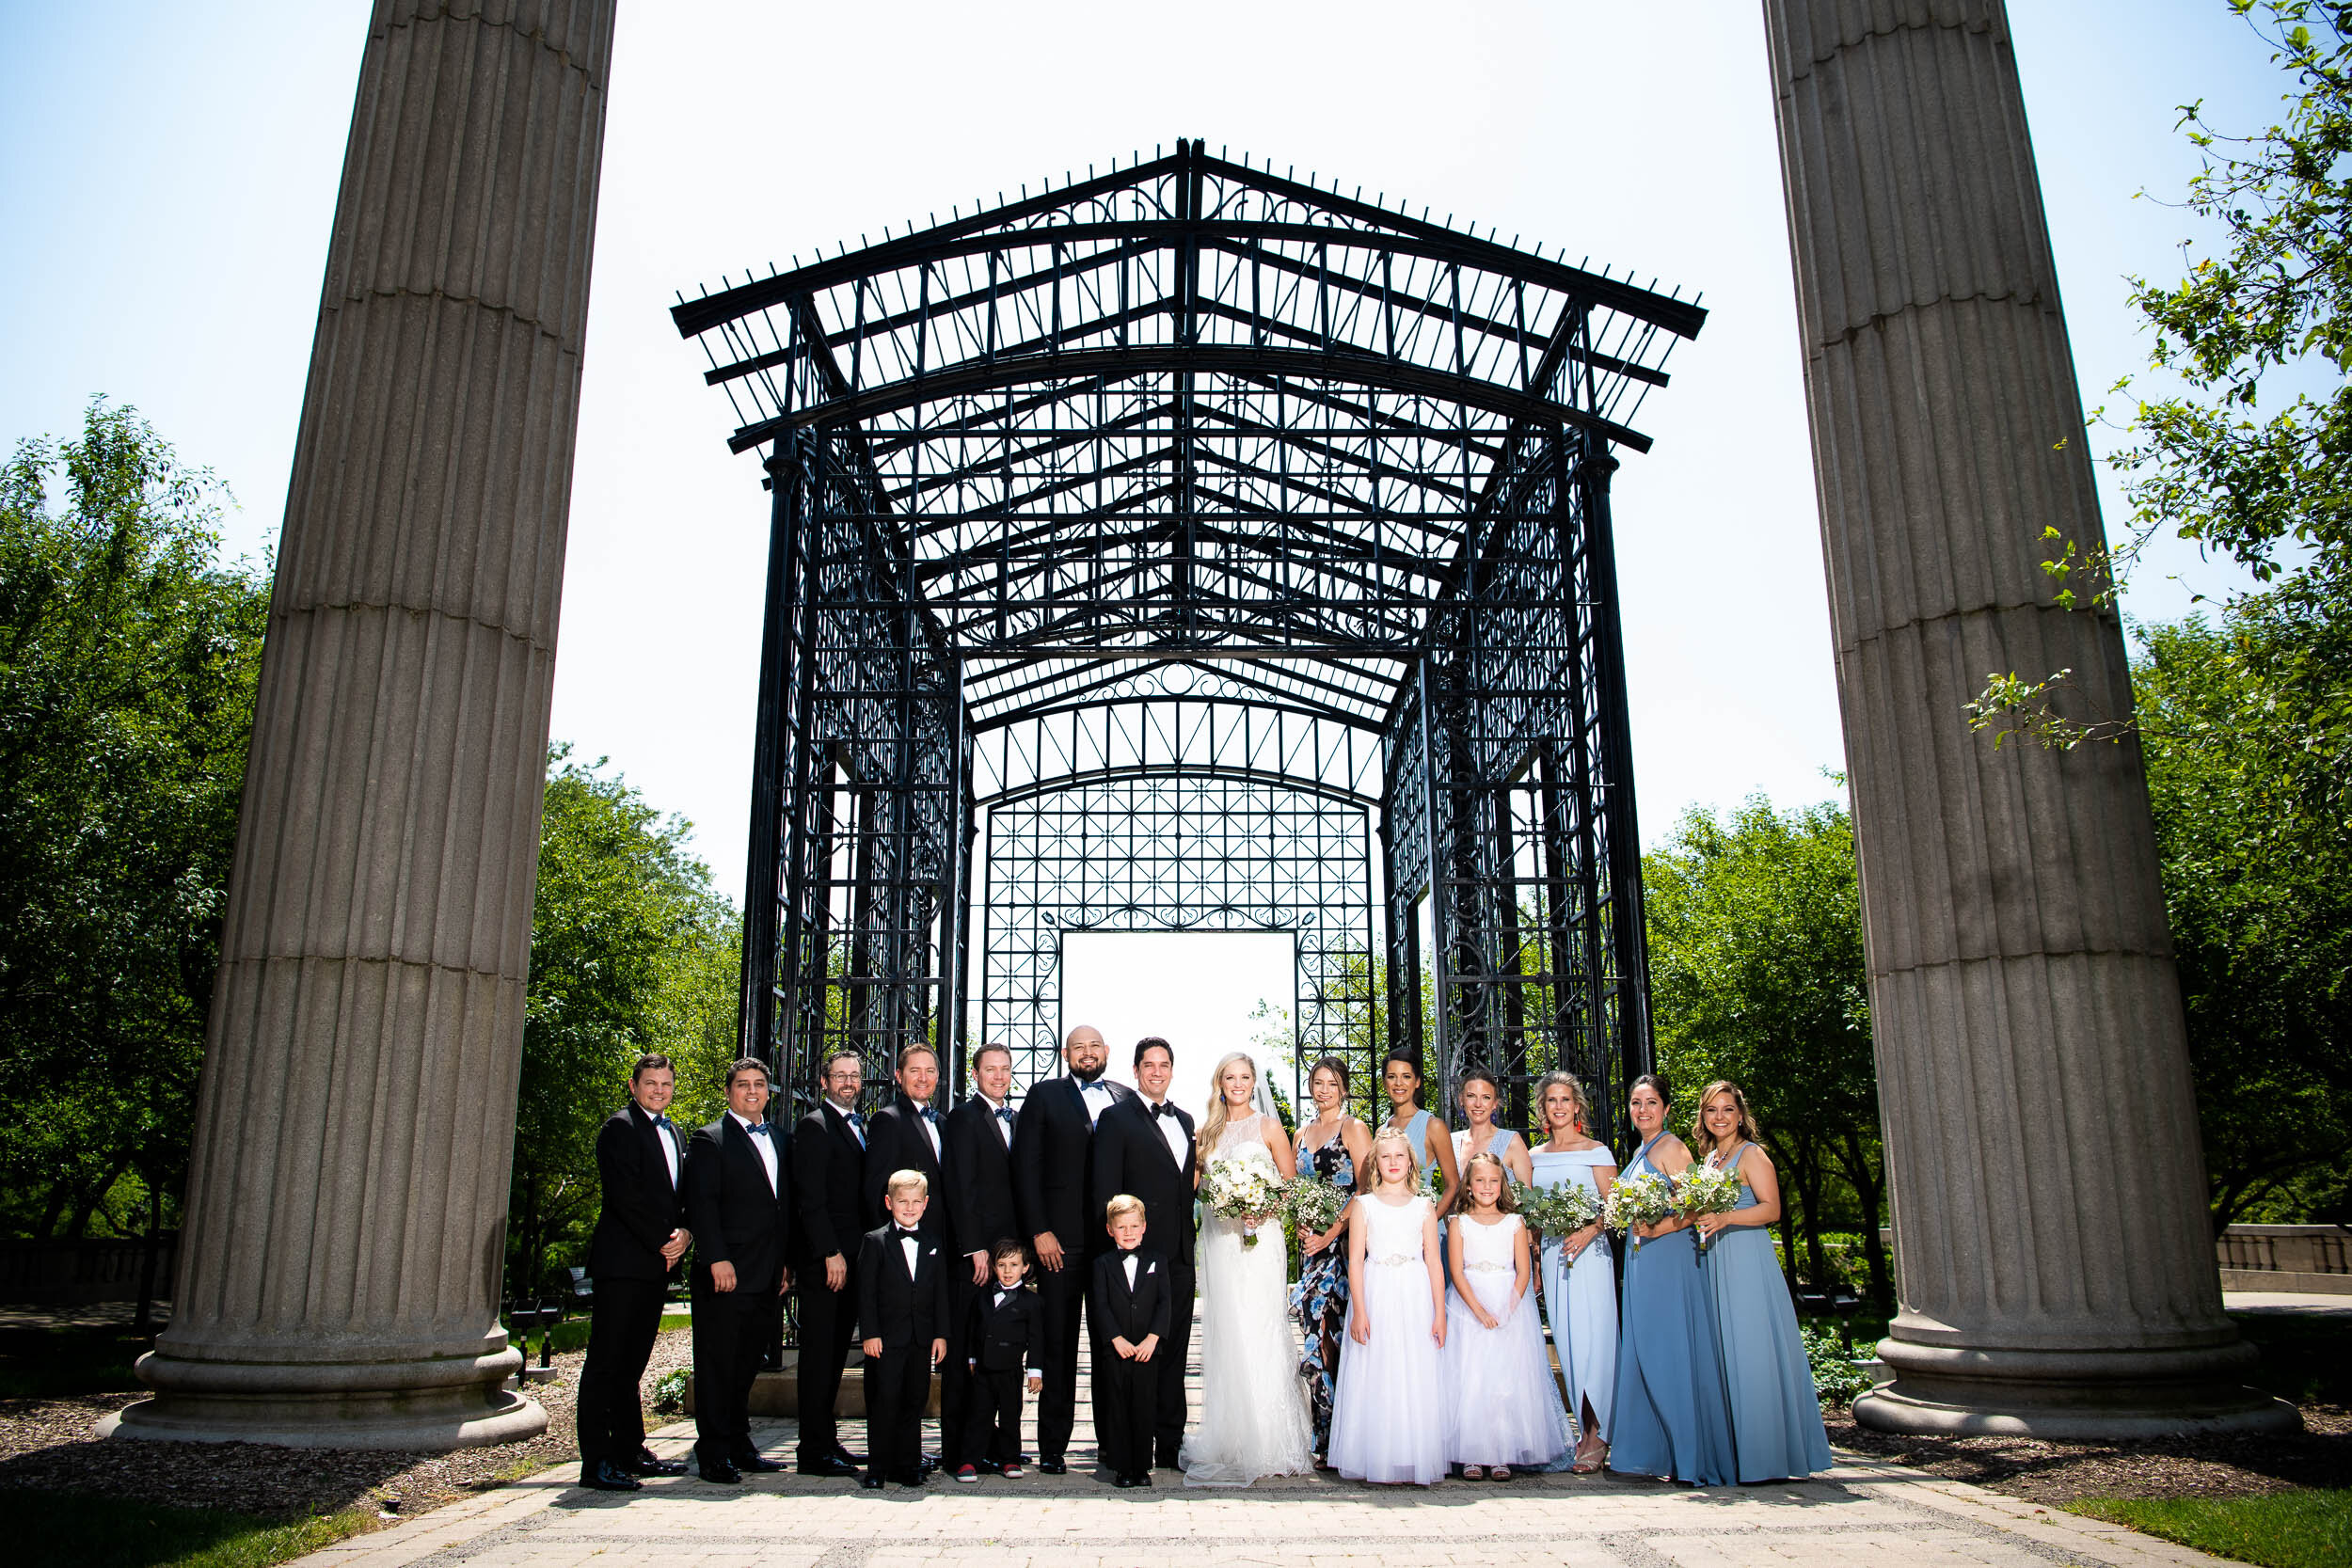 Wedding party portrait: Carnivale Chicago Wedding captured by J. Brown Photography